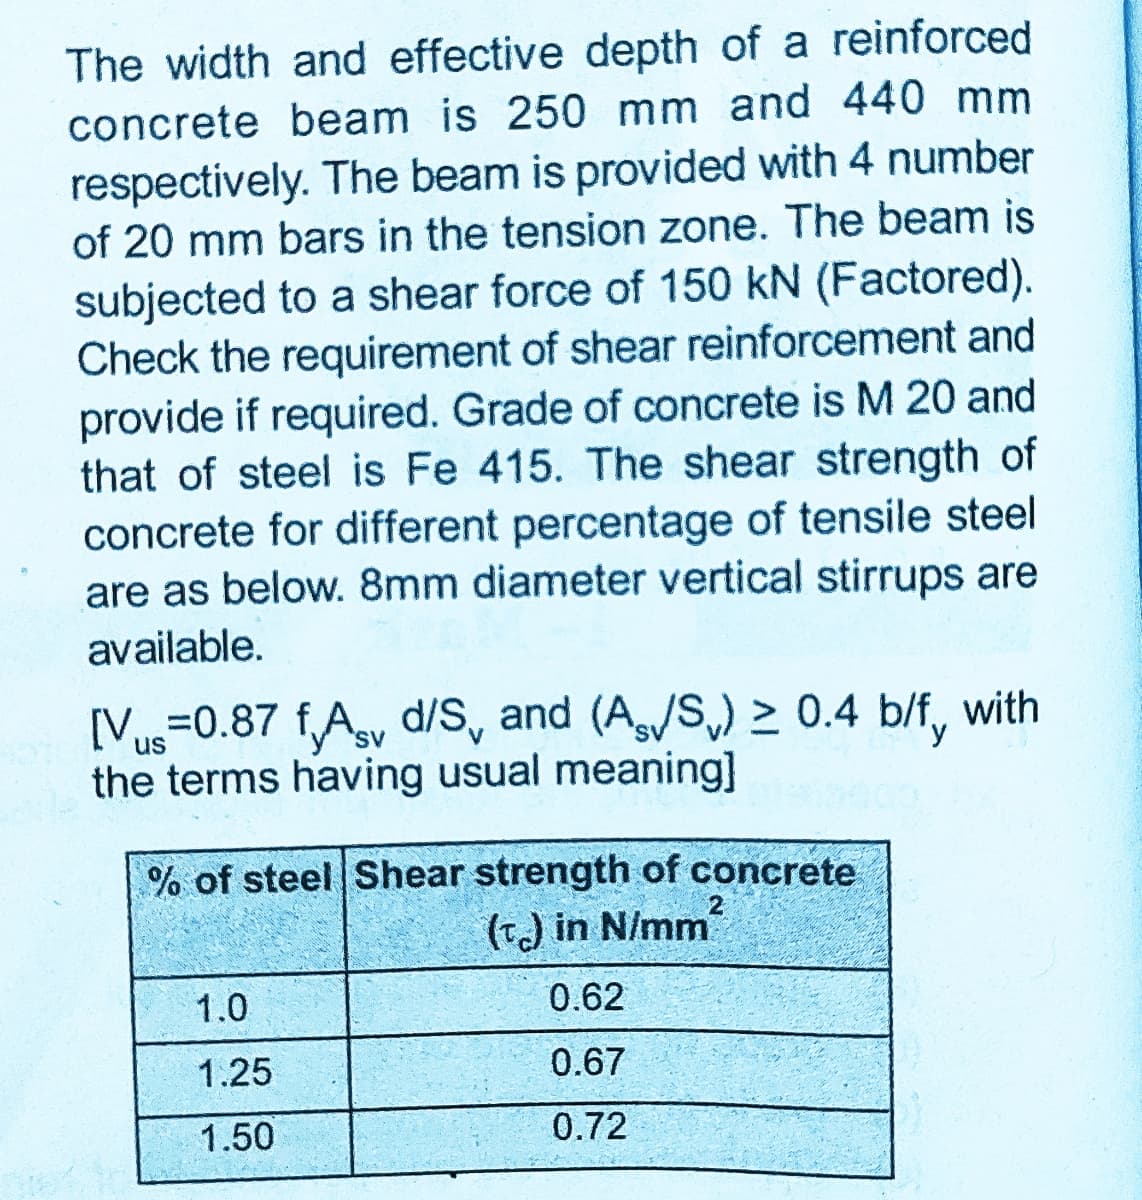 The width and effective depth of a reinforced
concrete beam is 250 mm and 440 mm
respectively. The beam is provided with 4 number
of 20 mm bars in the tension zone. The beam is
subjected to a shear force of 150 kN (Factored).
Check the requirement of shear reinforcement and
provide if required. Grade of concrete is M 20 and
that of steel is Fe 415. The shear strength of
concrete for different percentage of tensile steel
are as below. 8mm diameter vertical stirrups are
available.
[Vus=0.87 fAy d/S, and (A/S,) > 0.4 b/f, with
the terms having usual meaning]
% of steel Shear strength of concrete
(T) in N/mm
1.0
0.62
1.25
0.67
1.50
0.72
